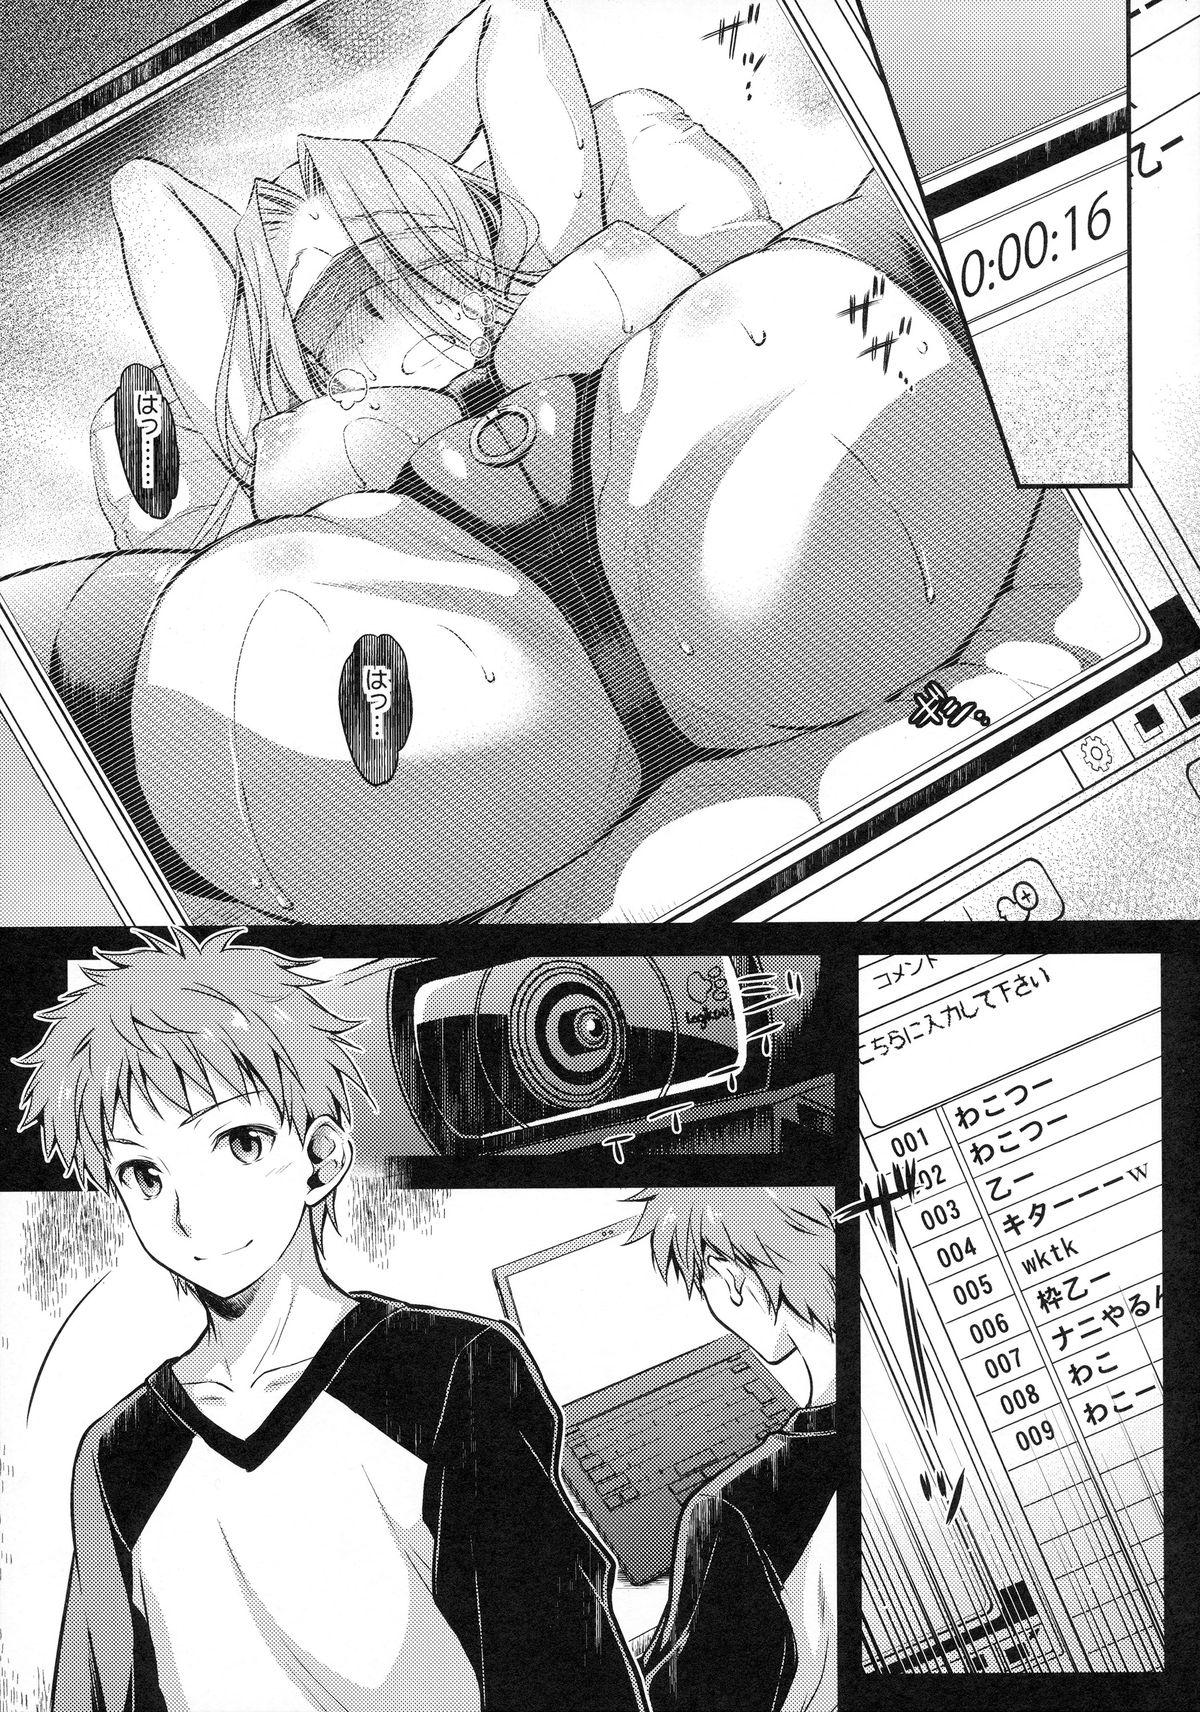 Que R.O.D 9 - Fate stay night Fate hollow ataraxia Fucked - Page 8